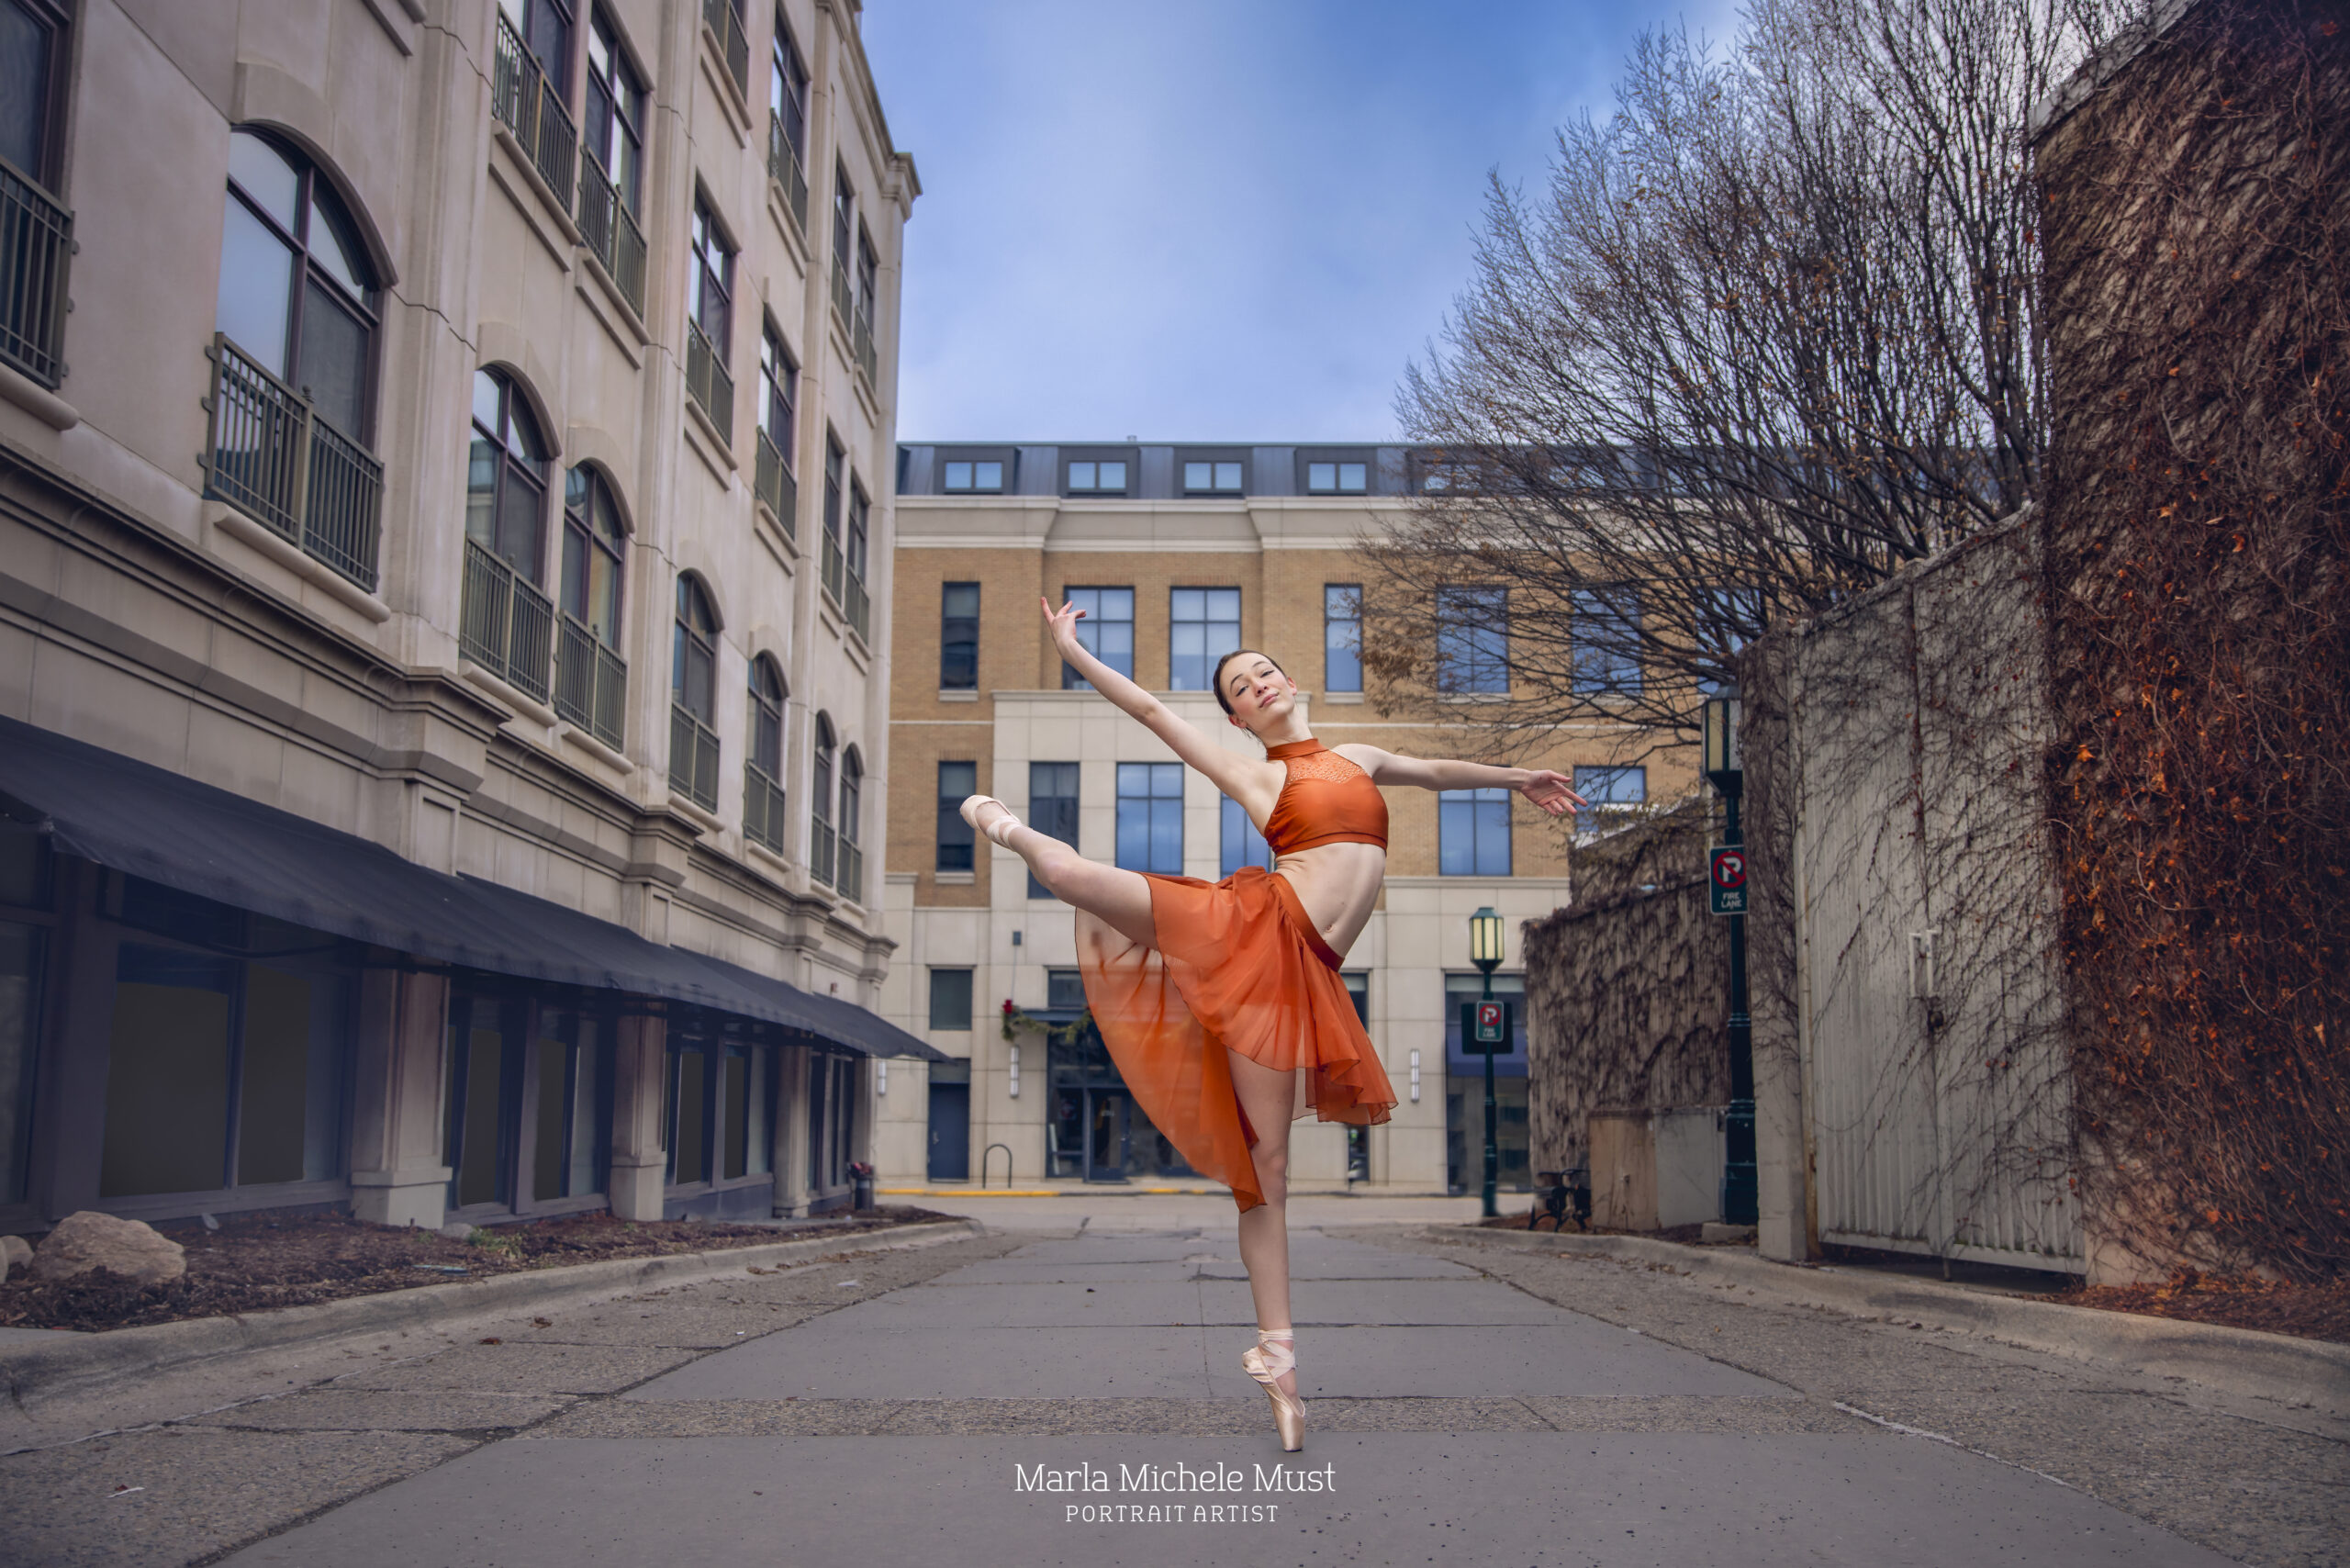 Dancer extends her leg in a poised arabesque pose on a city street, captured by a Detroit-based photographer.